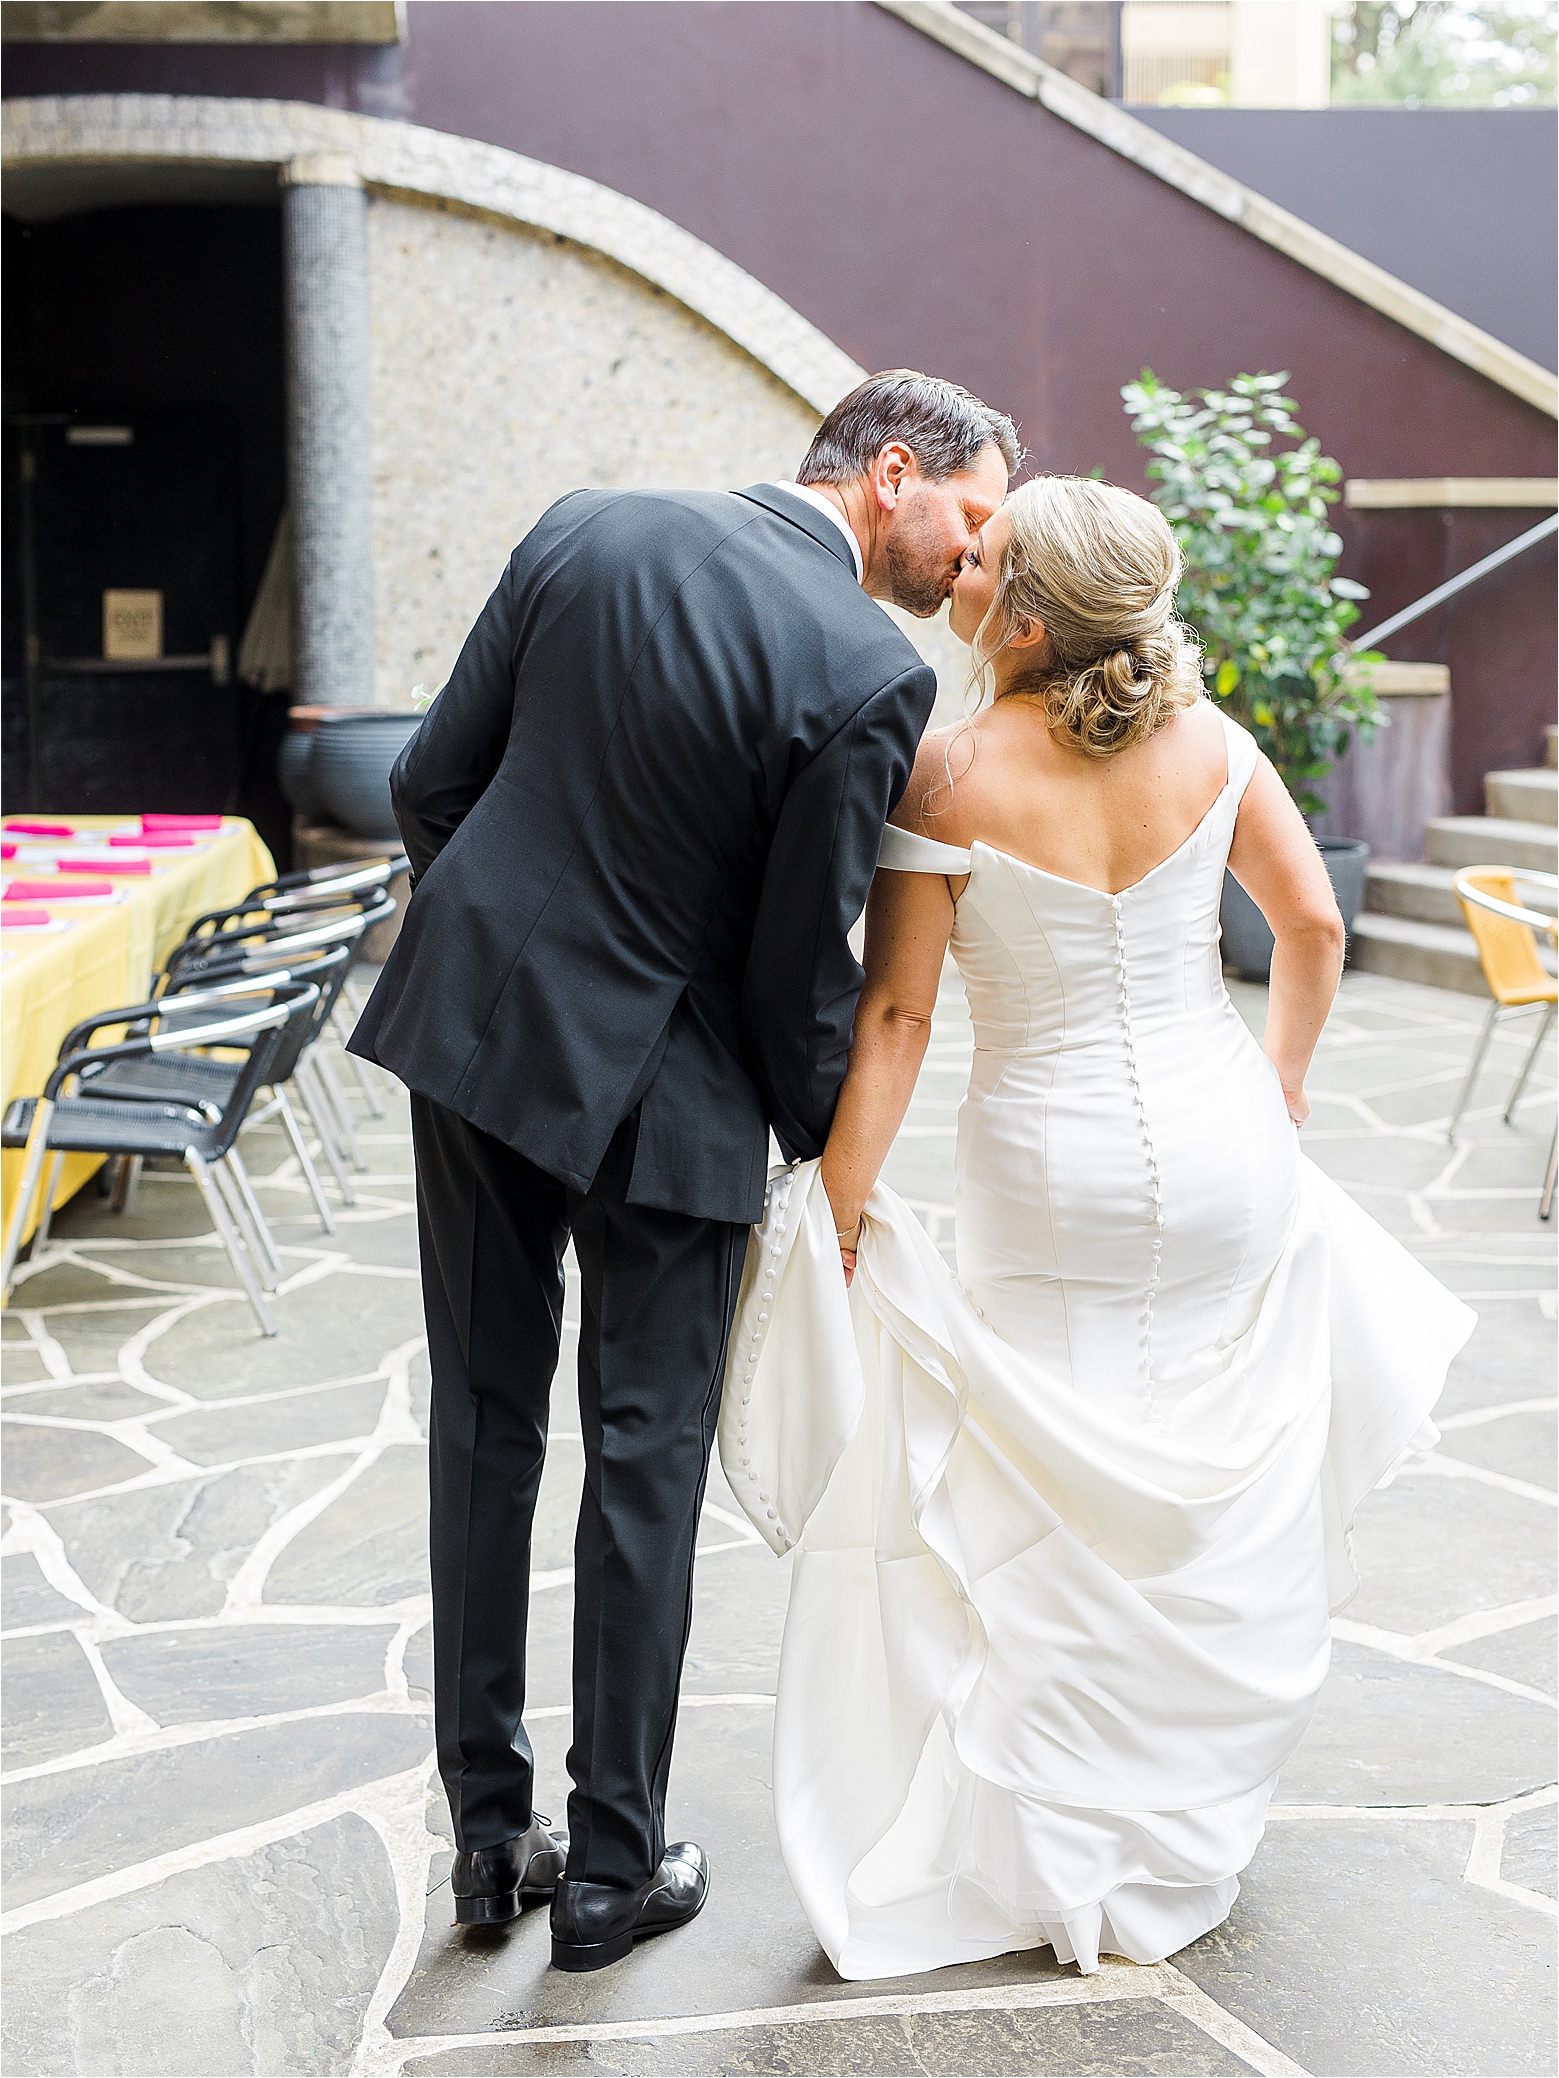 A couple shares a kiss as we see them from behind on the Hotel Valencia Patio as they head to their wedding ceremony.